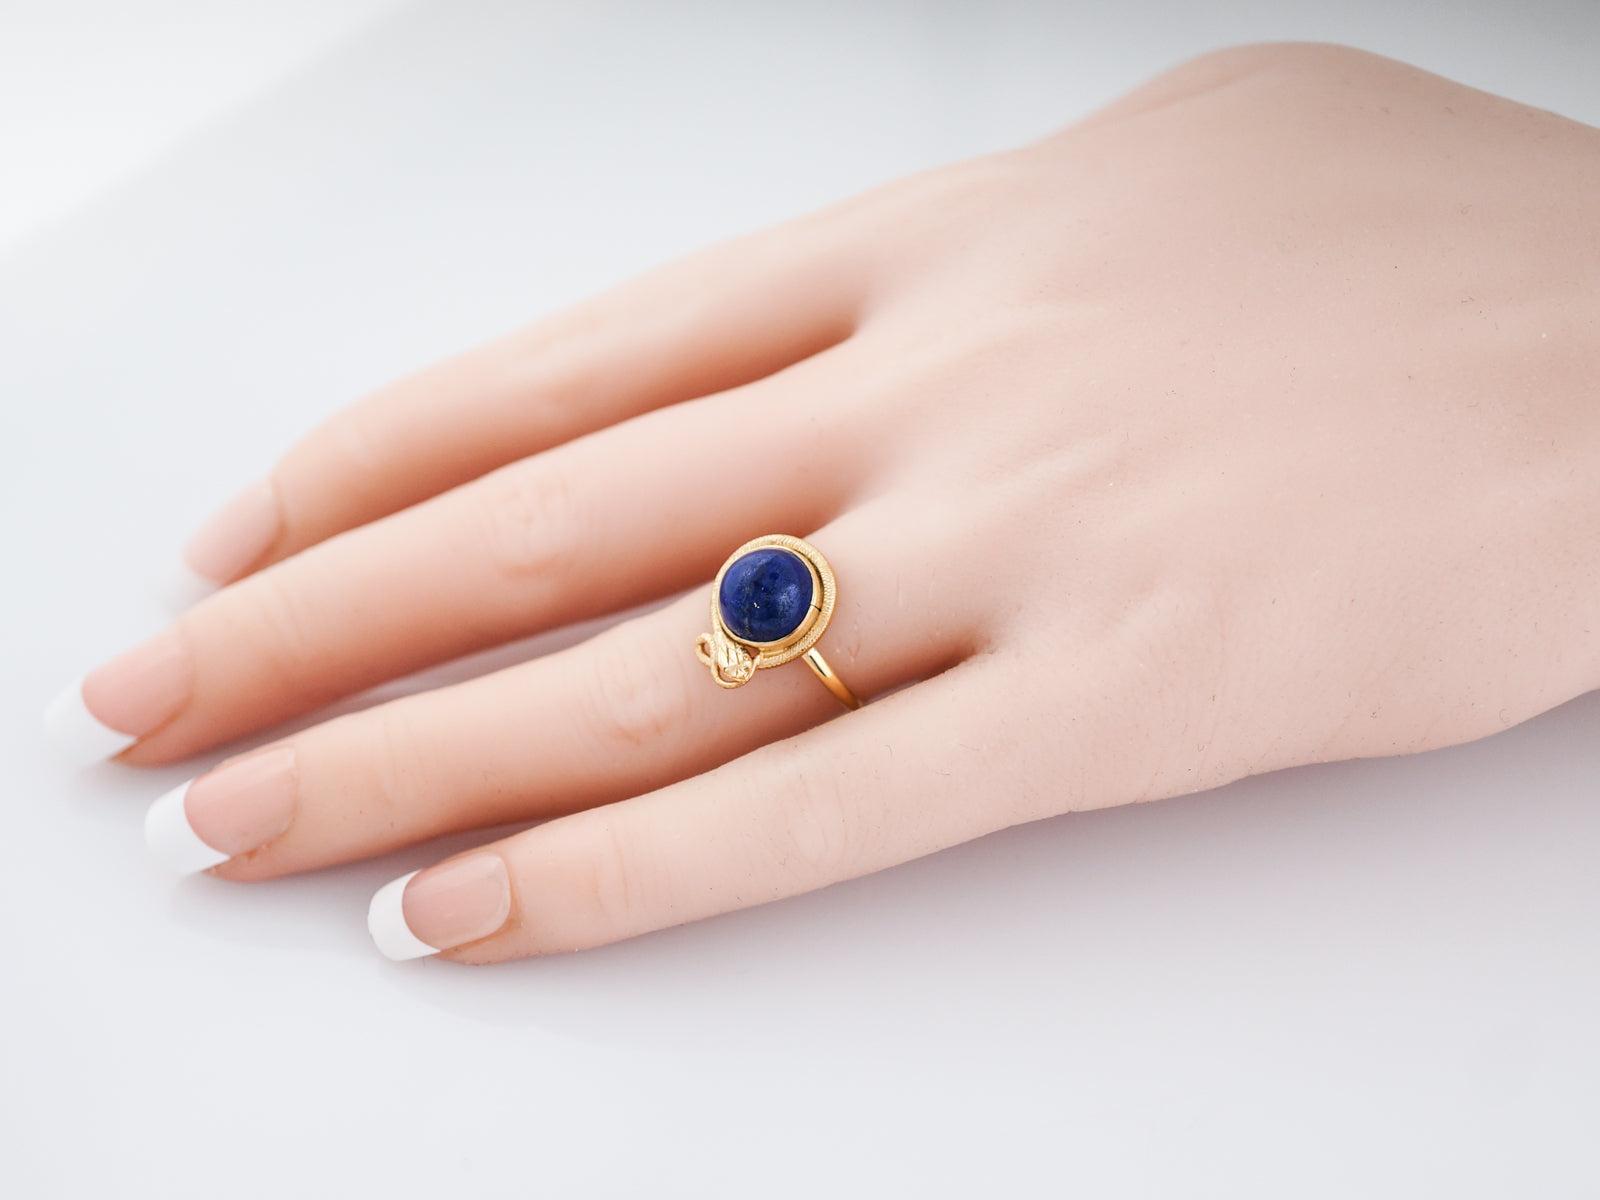 Antique Right Hand Ring Victorian 1.58 Cabochon Cut Lapis in 14k Yellow Gold